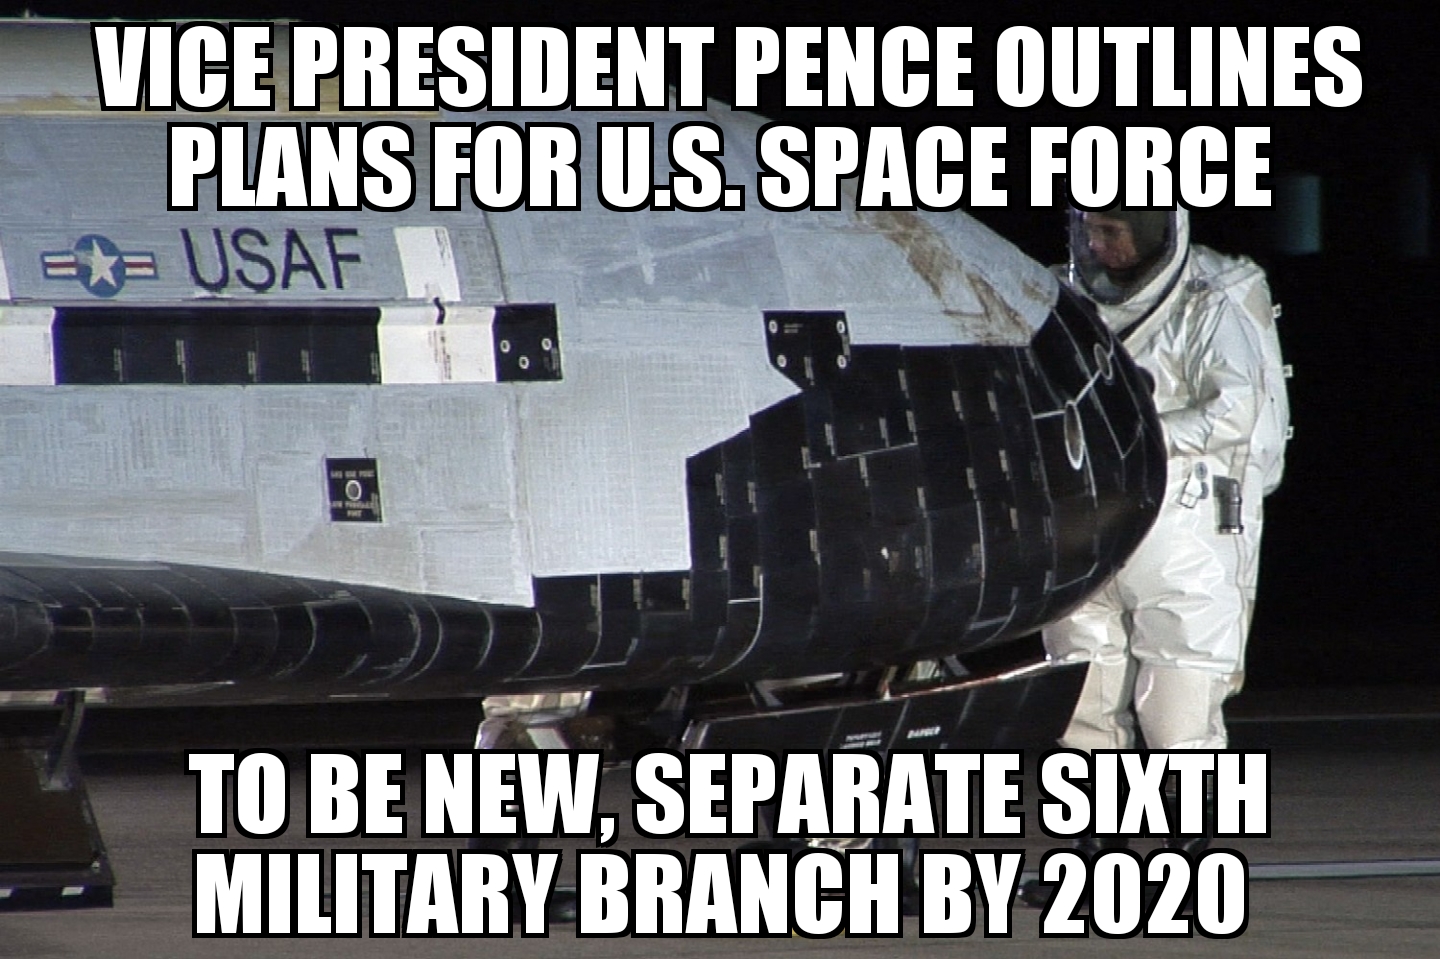 Pence outlines U.S. Space Force